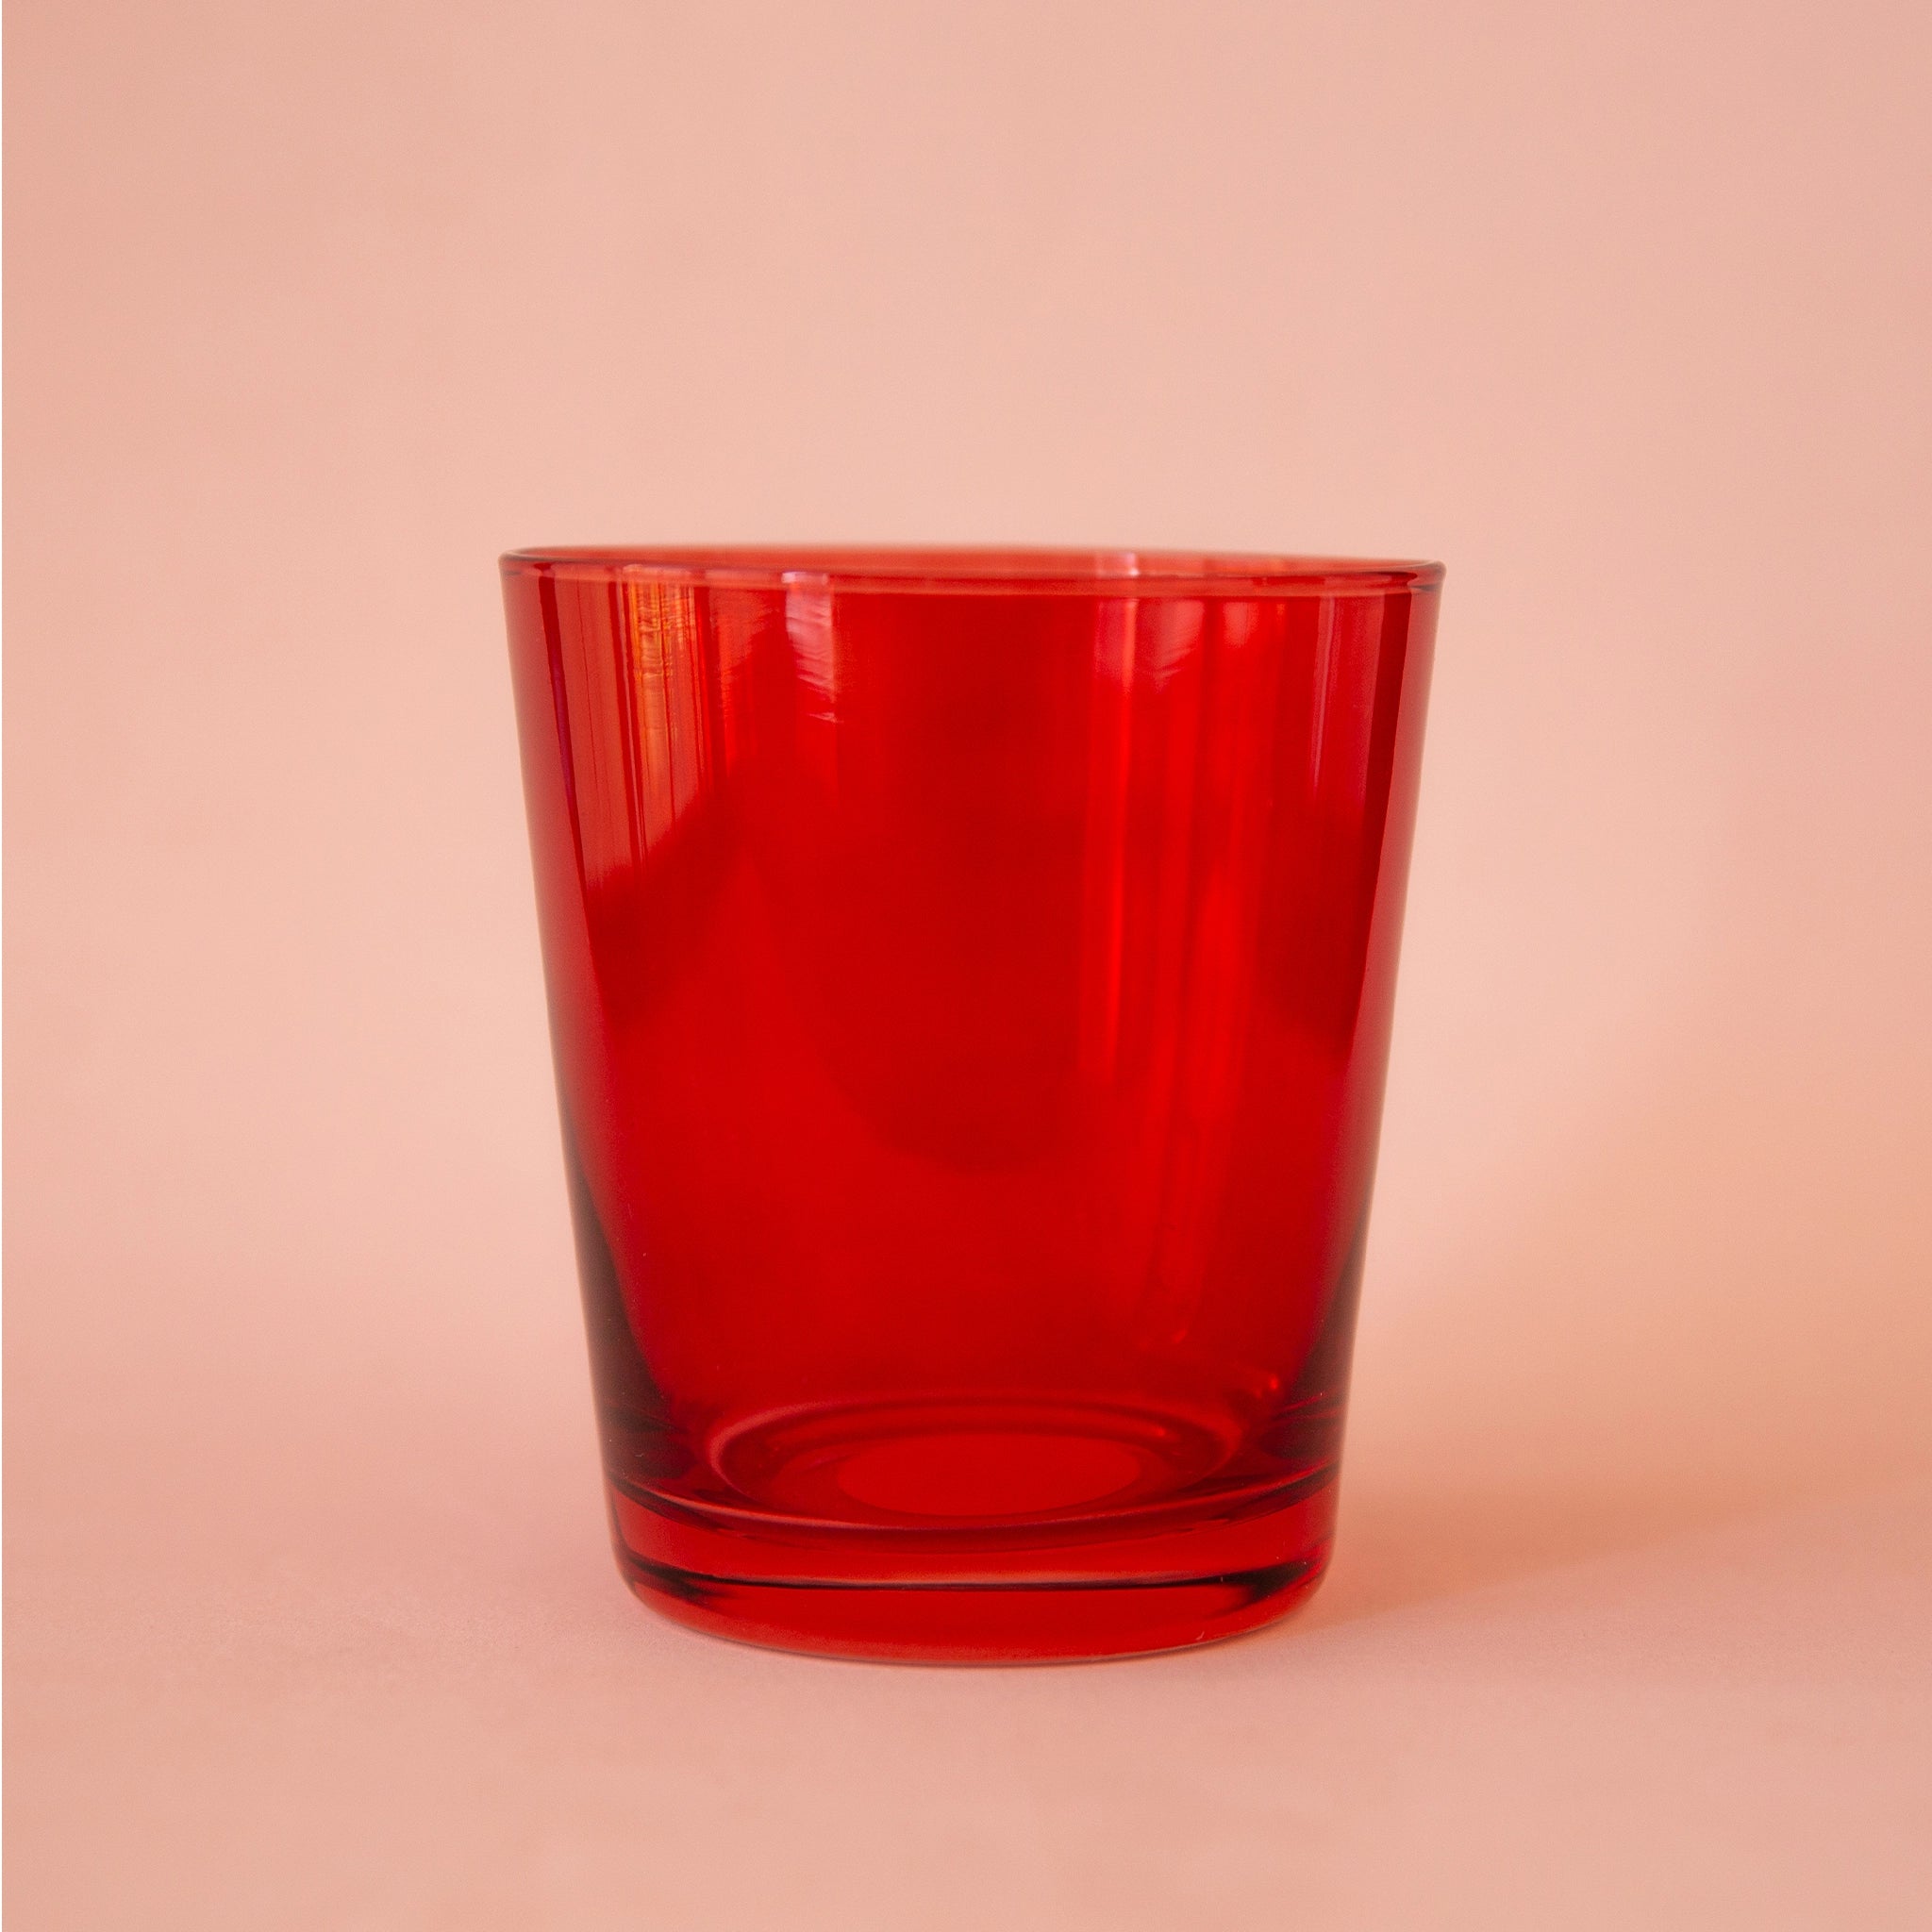 On a peach background is a short red drinking glass